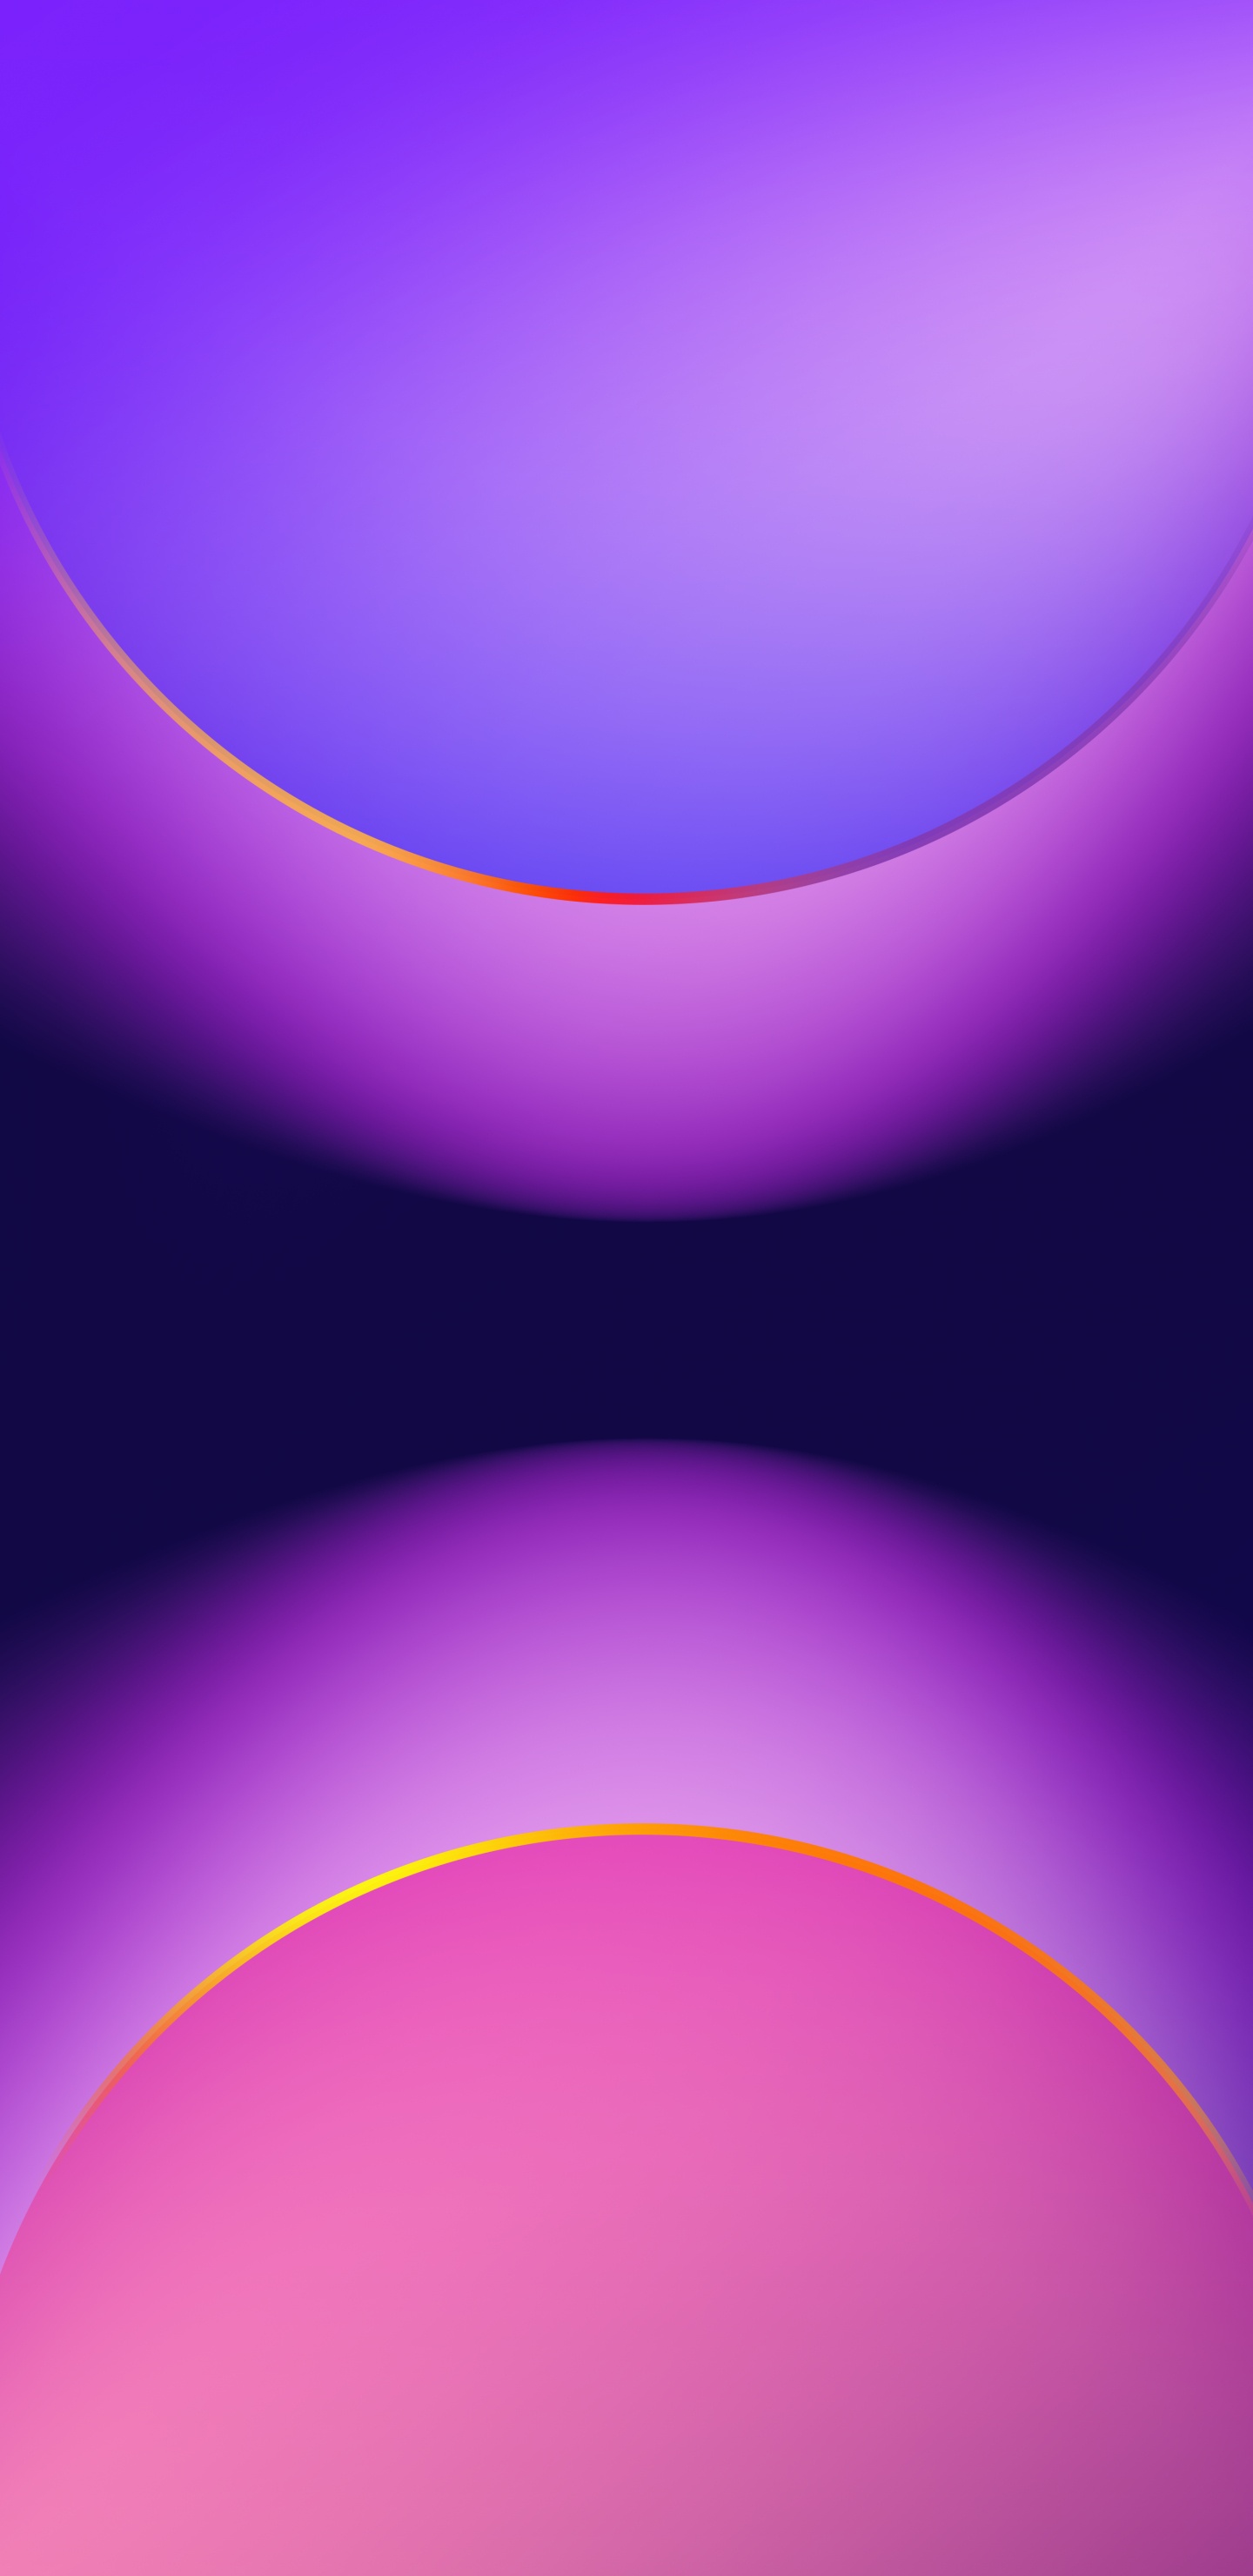 Circle, Apples, Ios, Colorfulness, Purple. Wallpaper in 1440x2960 Resolution